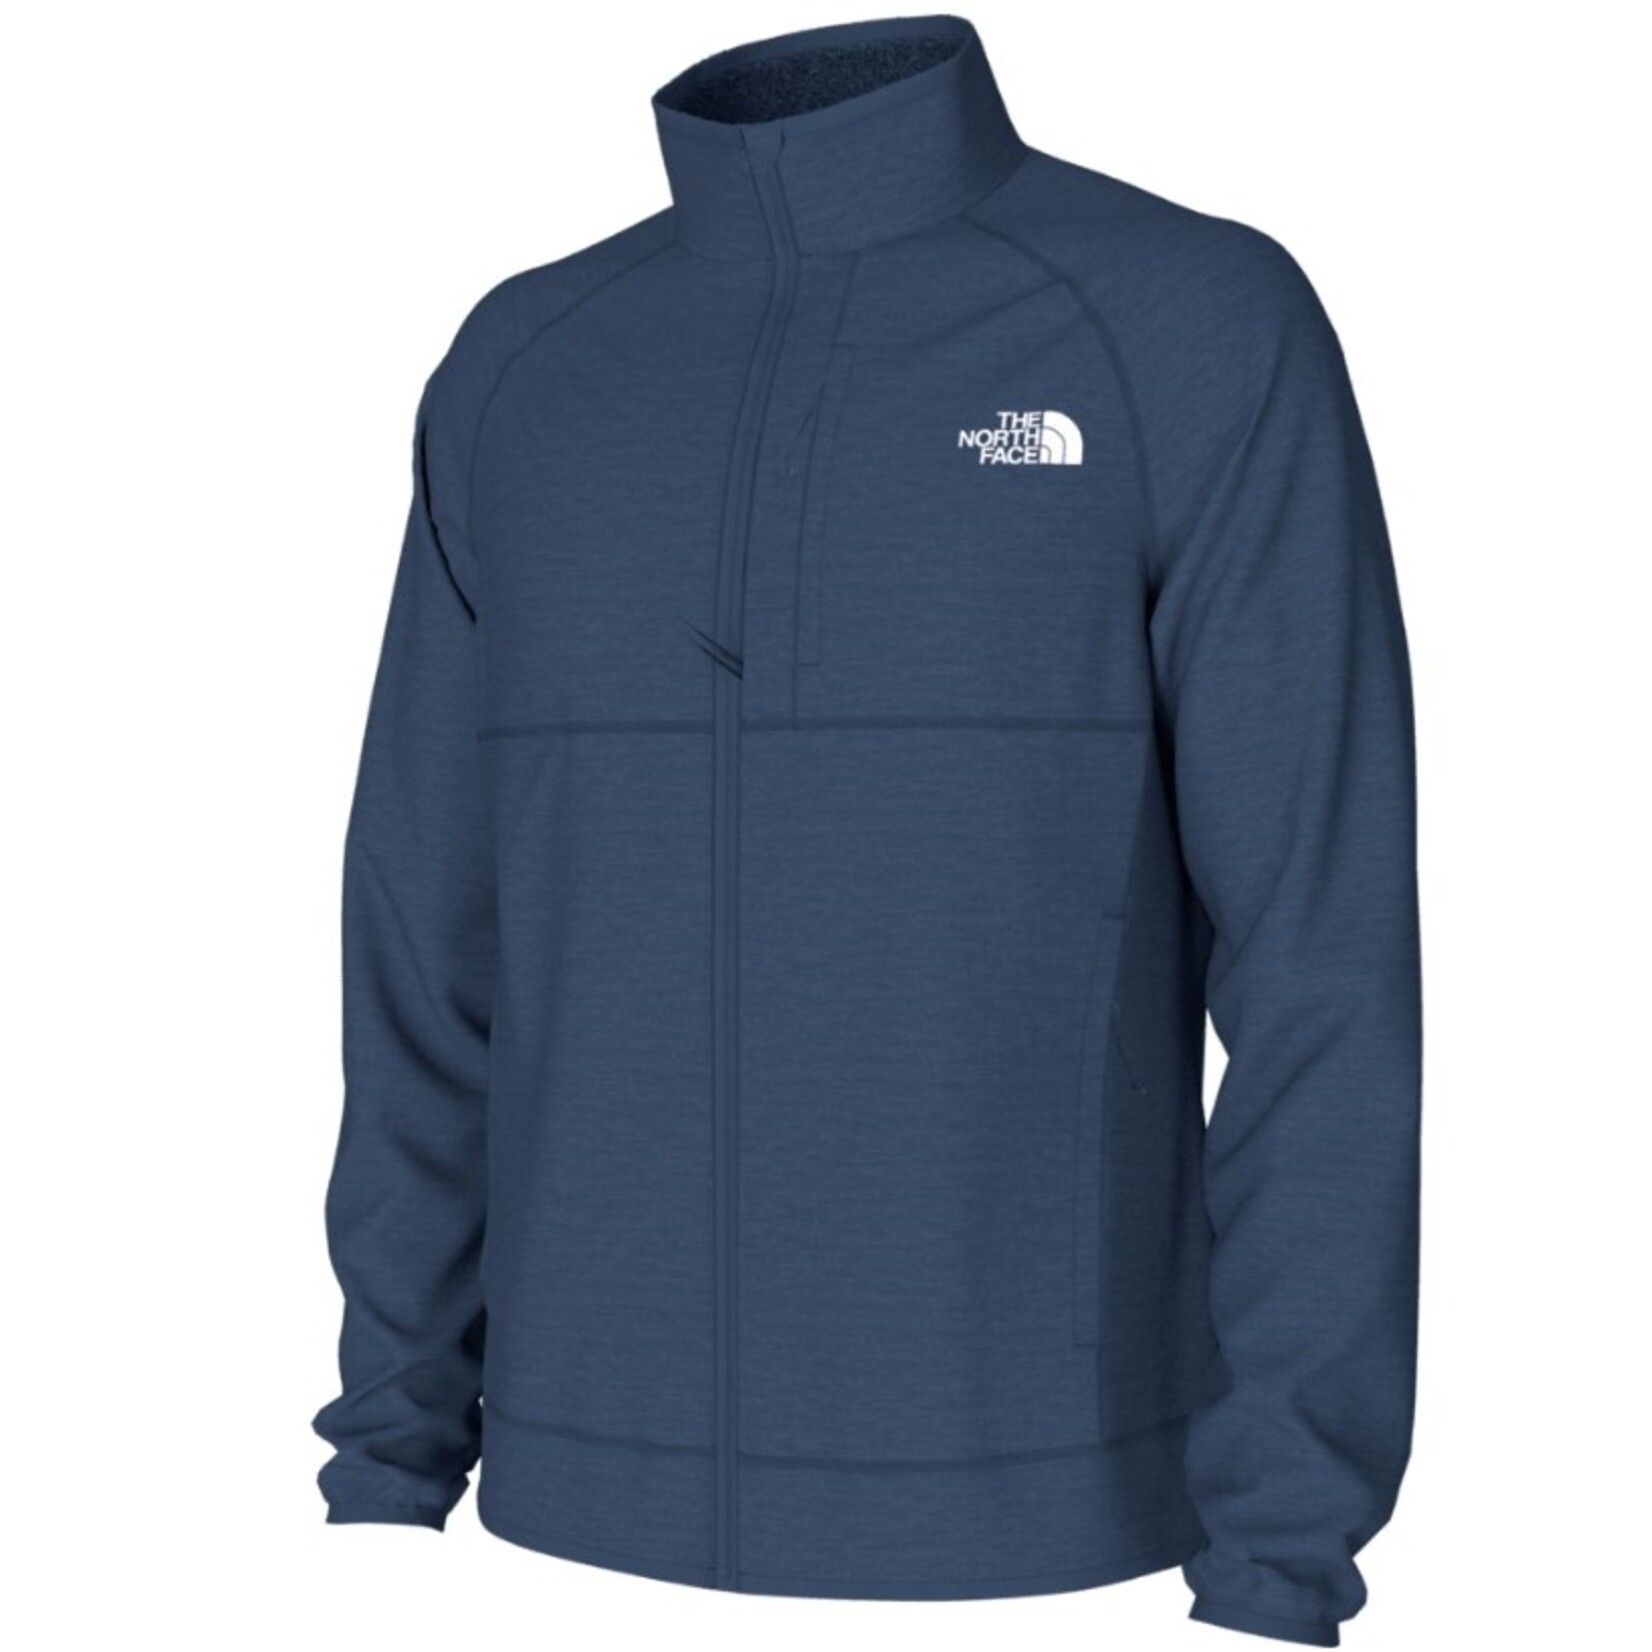 The North Face Canyonlands Full-Zip Jacket - Men's - Clothing